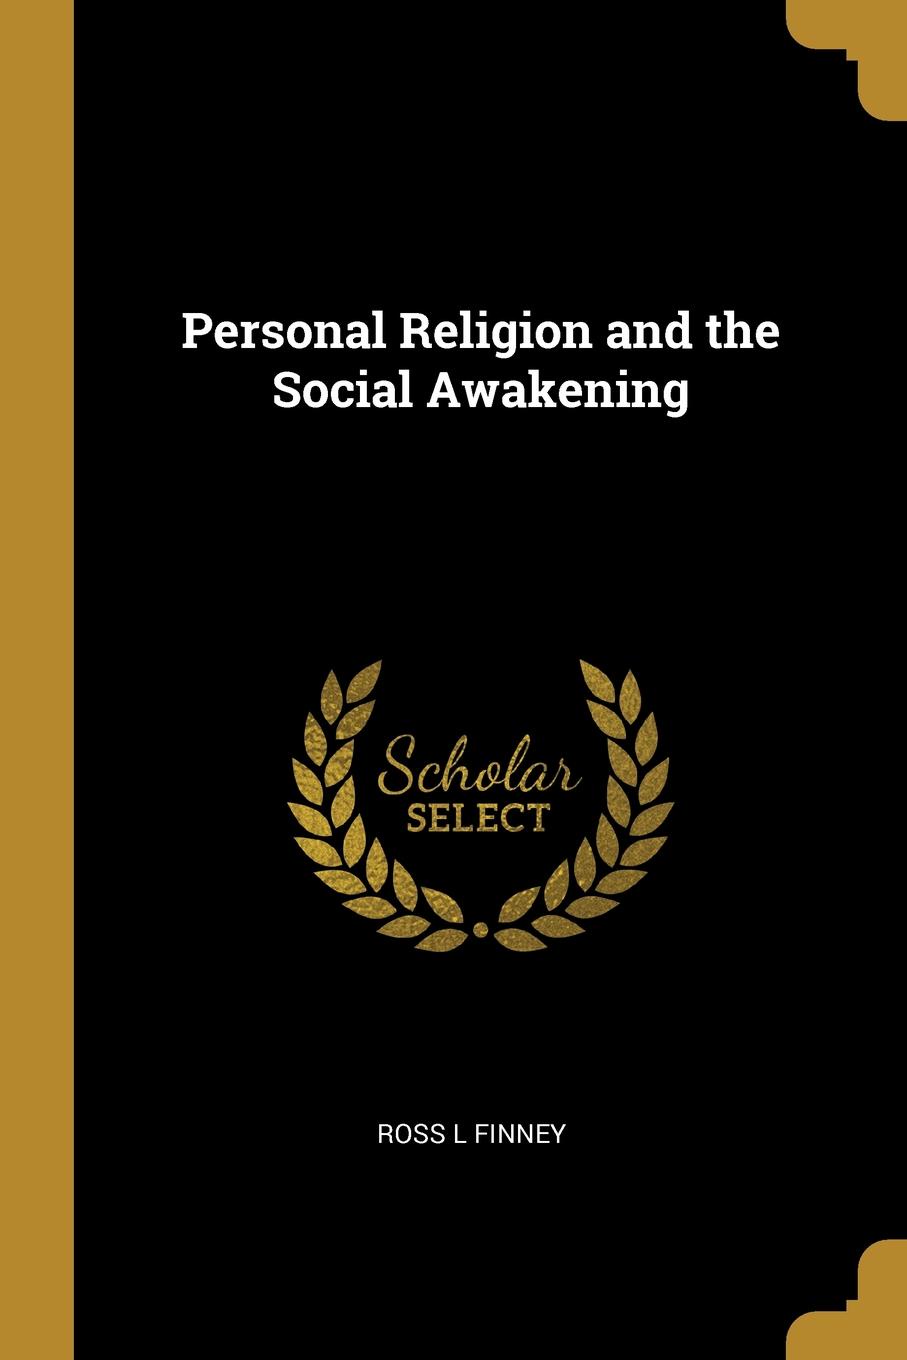 Personal Religion and the Social Awakening